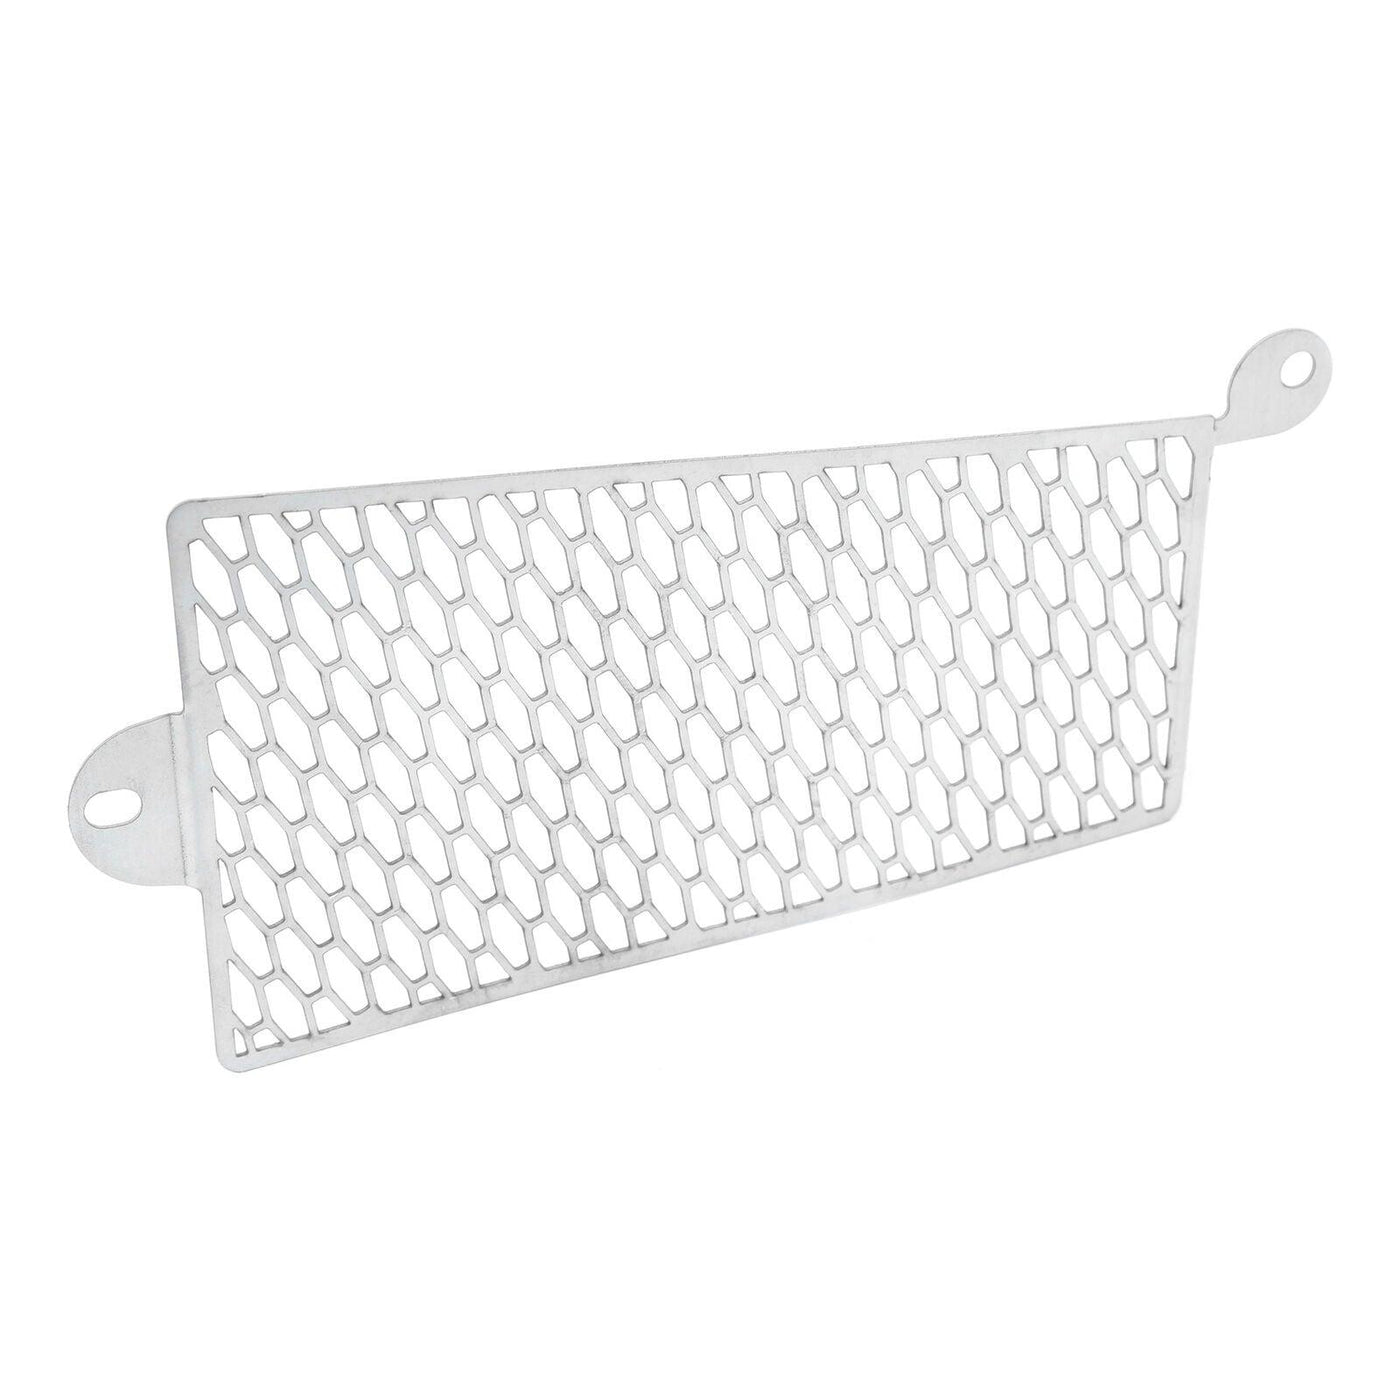 Radiator Grille Oil Cooler Guard Cover Fit For Softail Fat Boy Sport Glide 18-up - Moto Life Products